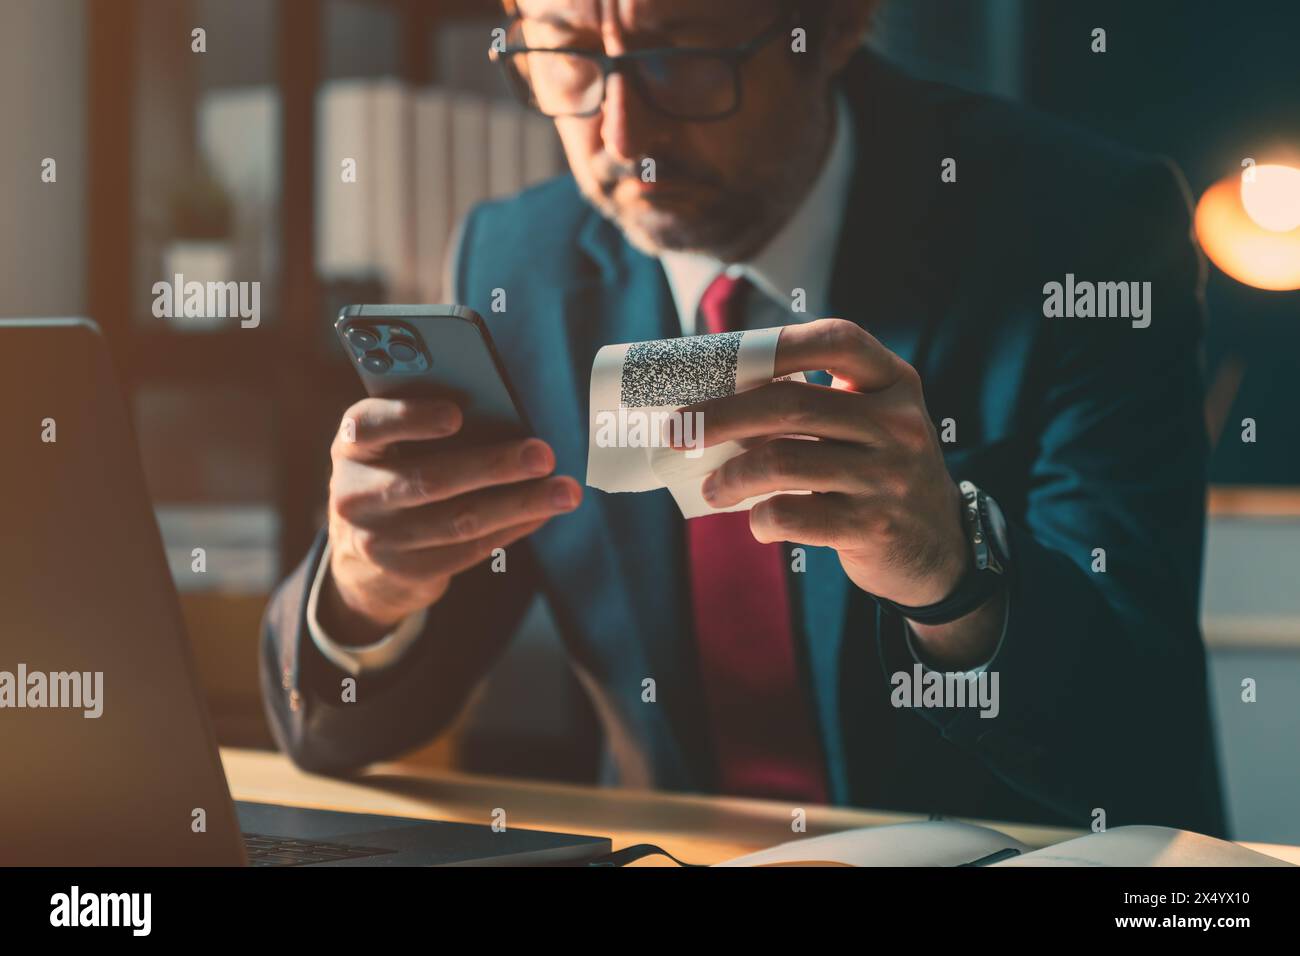 Financial ombudsman checking fiscal receipt issued to customer as proof of purchase for goods or services, selective focus Stock Photo